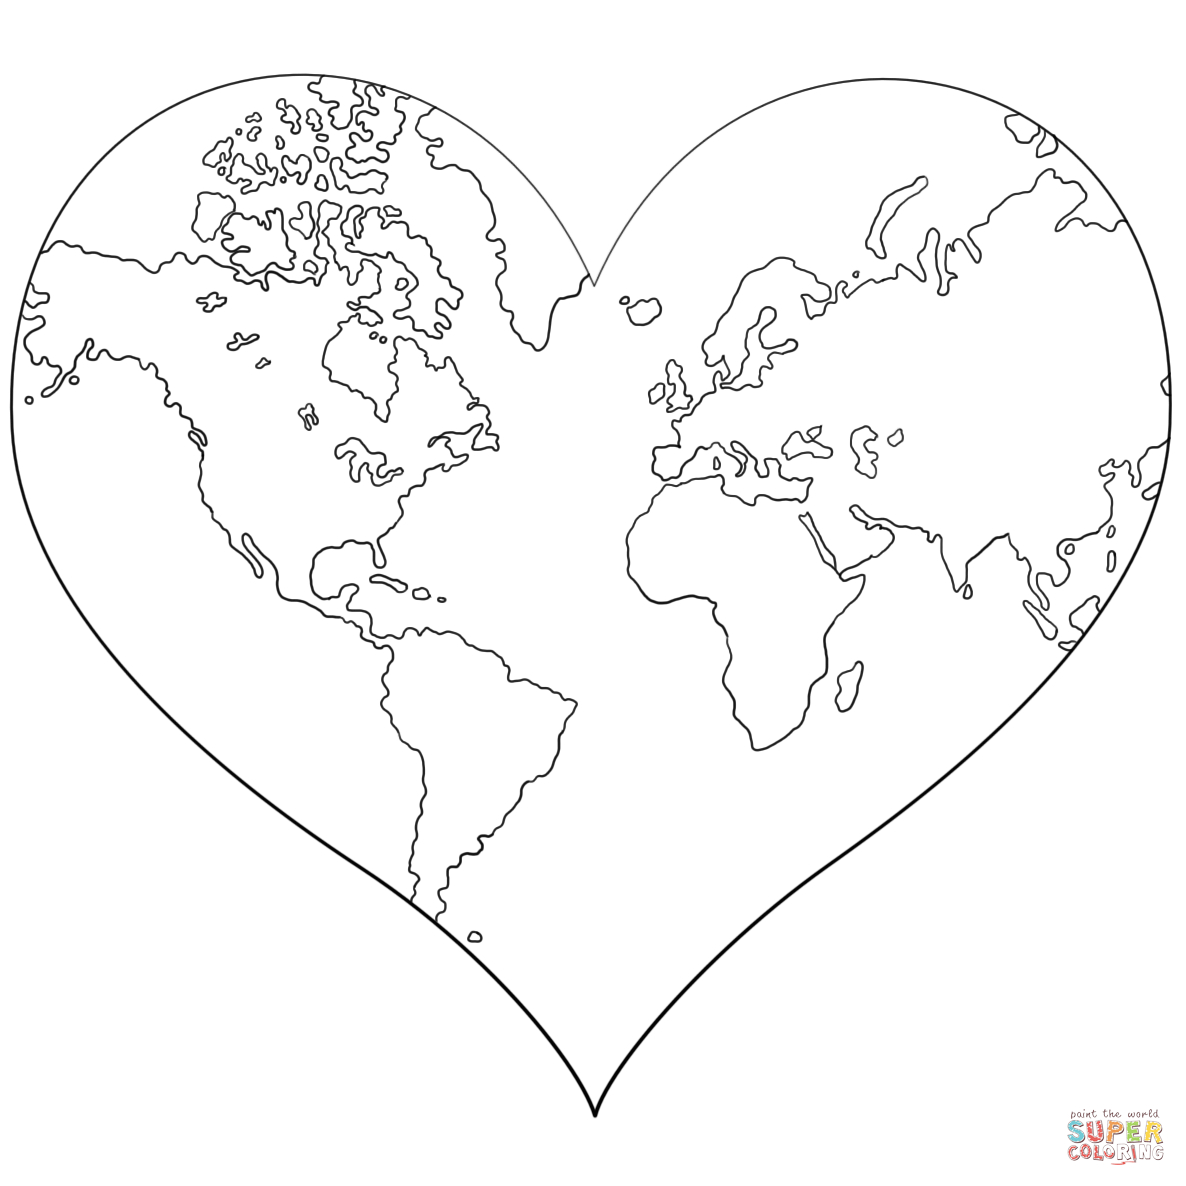 Heart Shaped Earth Coloring Page | Free Printable Coloring Pages - Earth Coloring Pages Free Printable